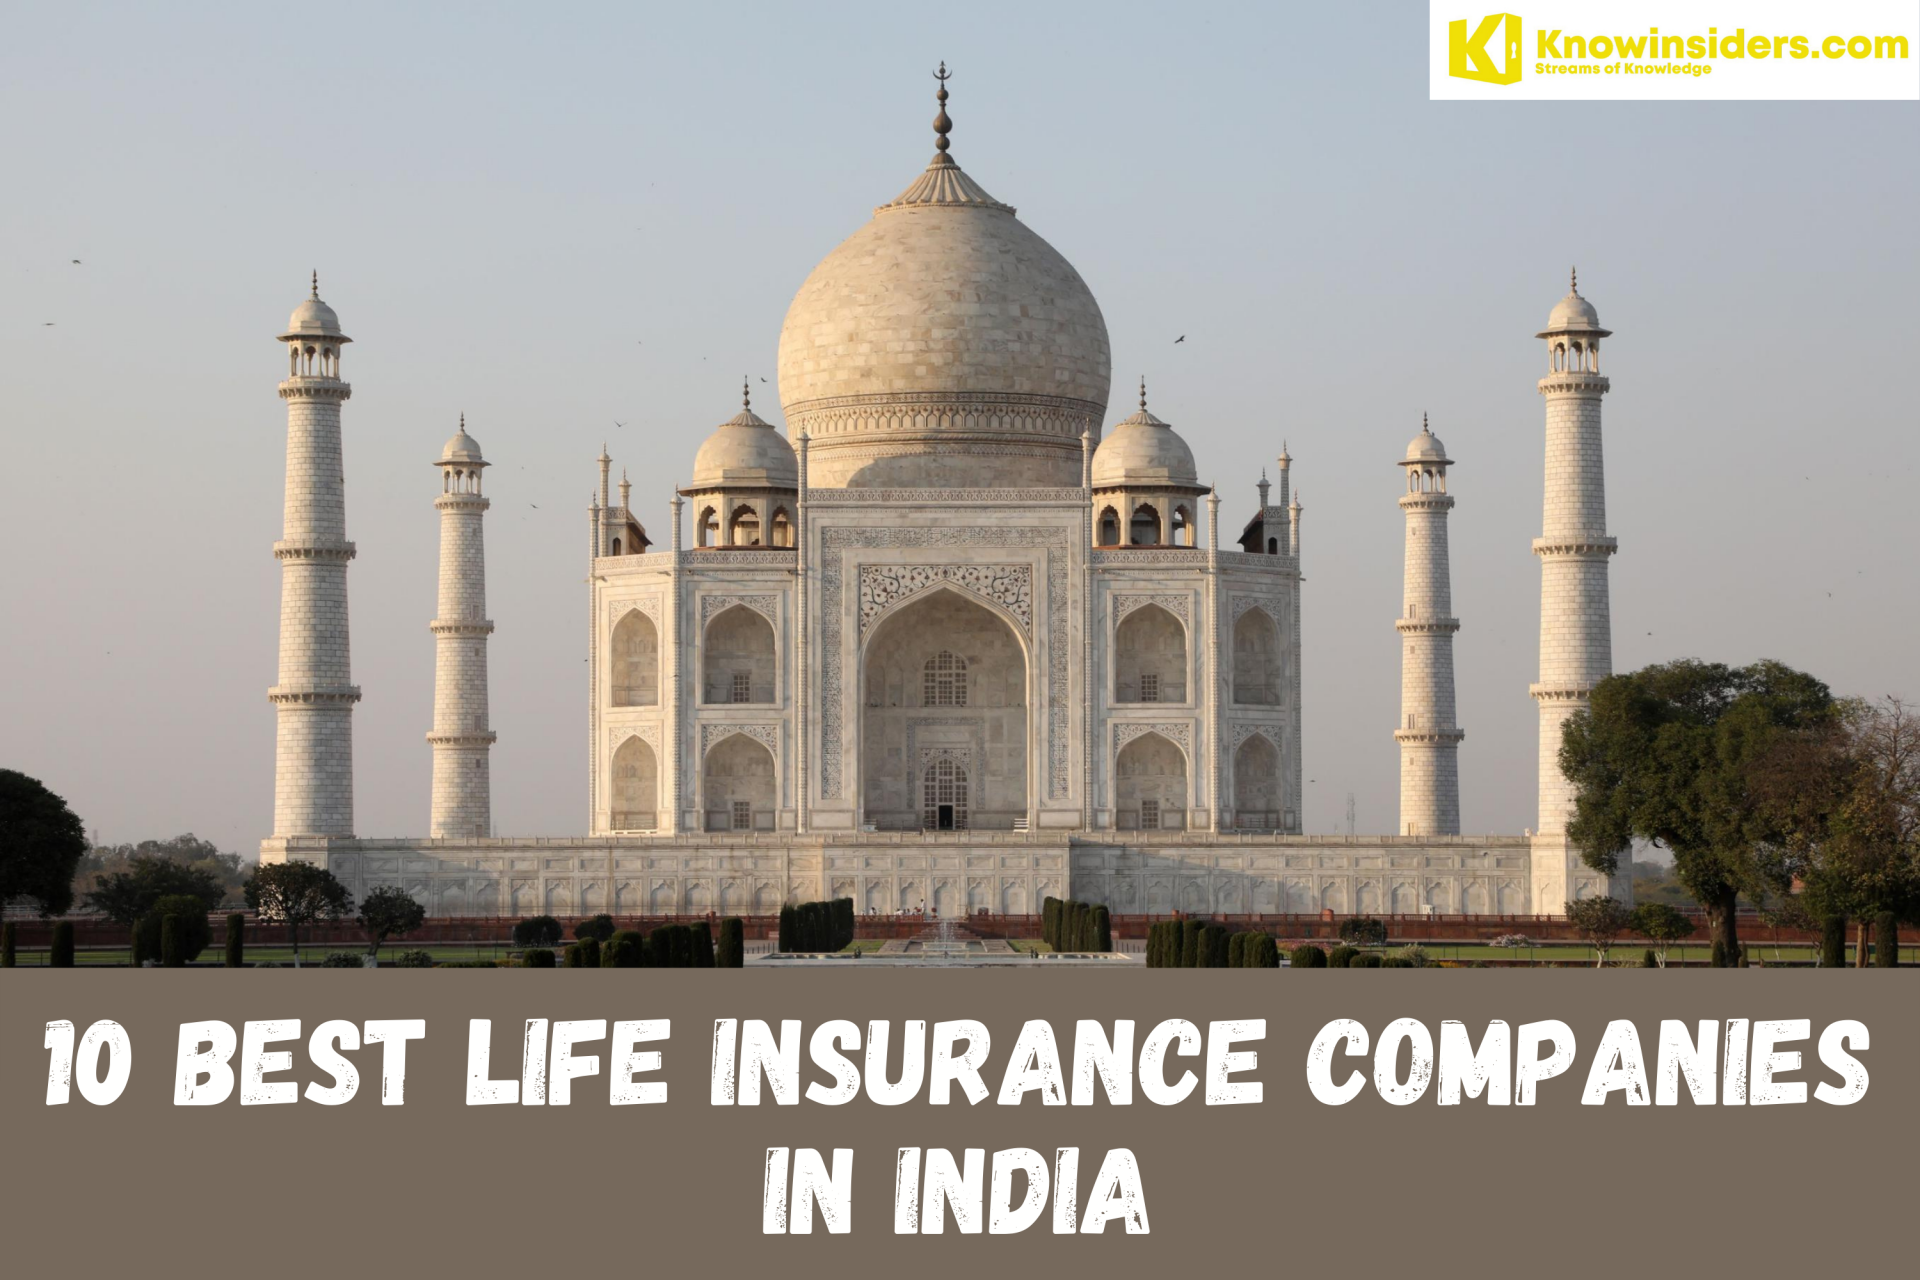 10 Best Life Insurance Companies In India